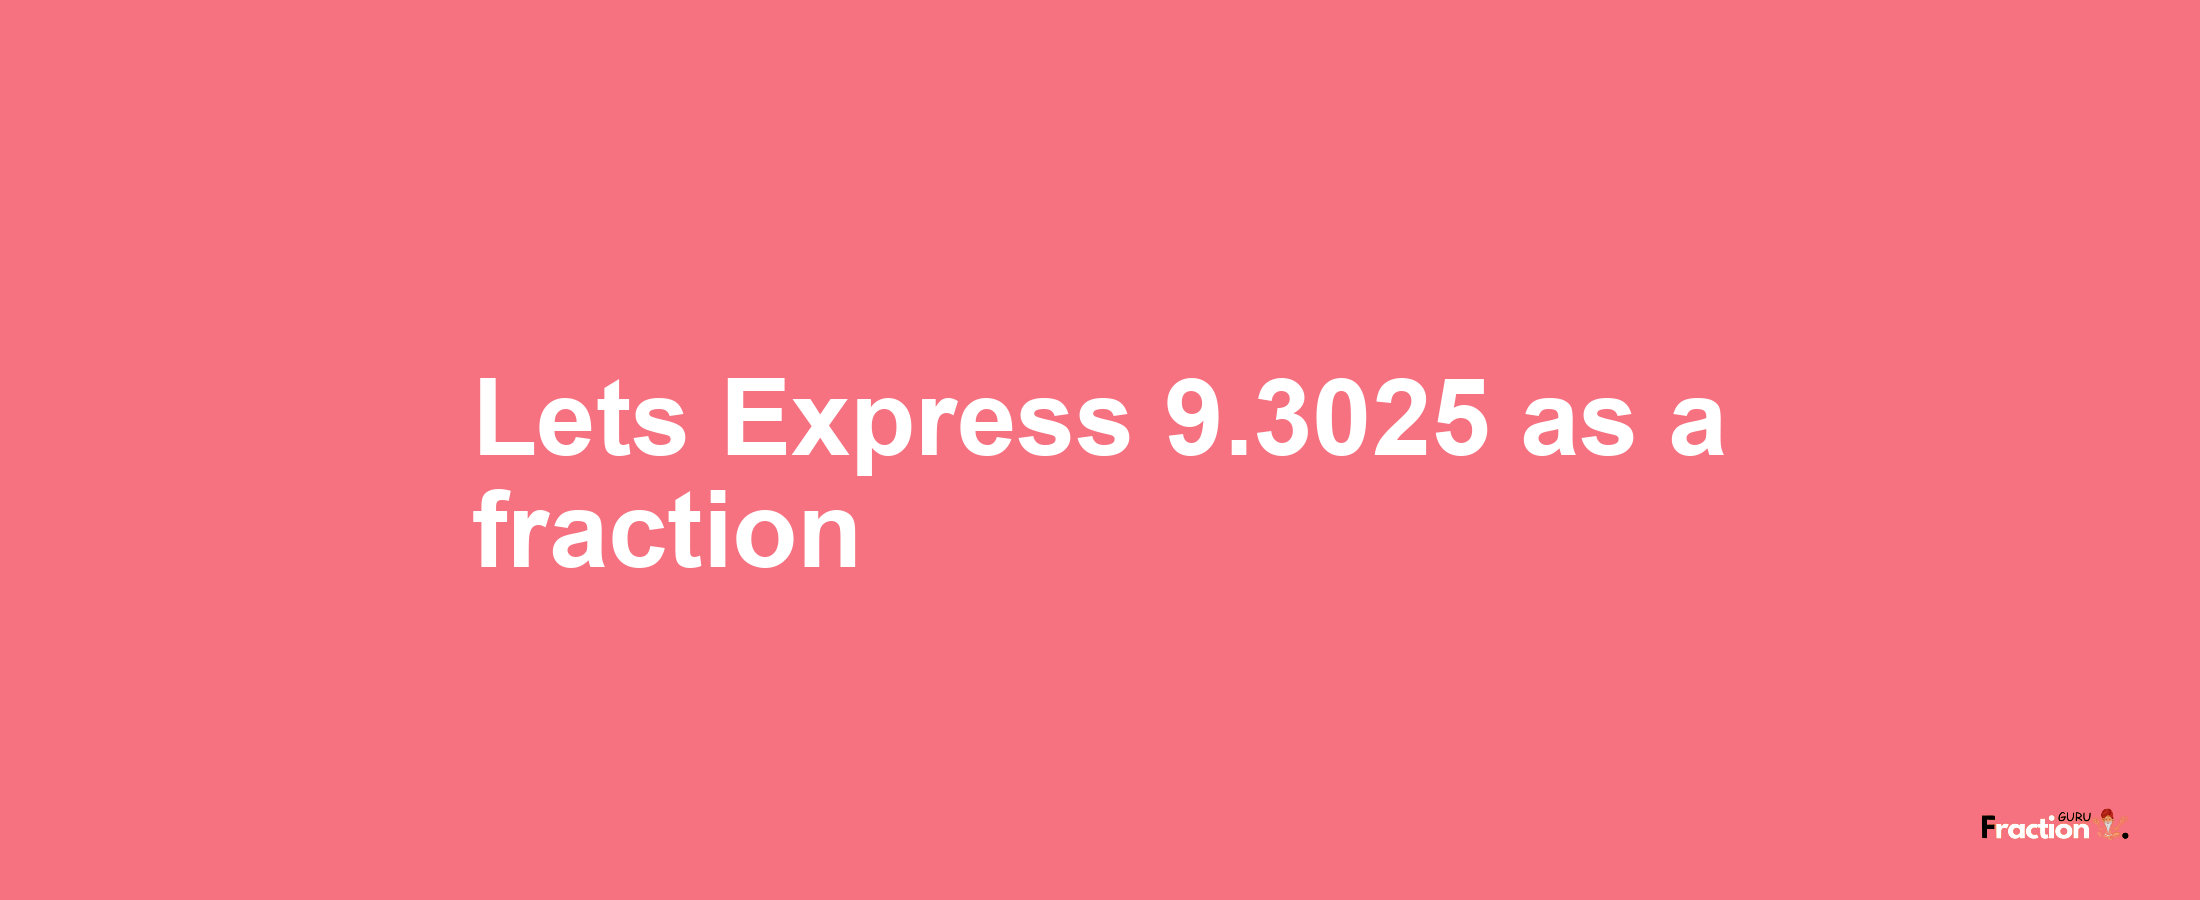 Lets Express 9.3025 as afraction